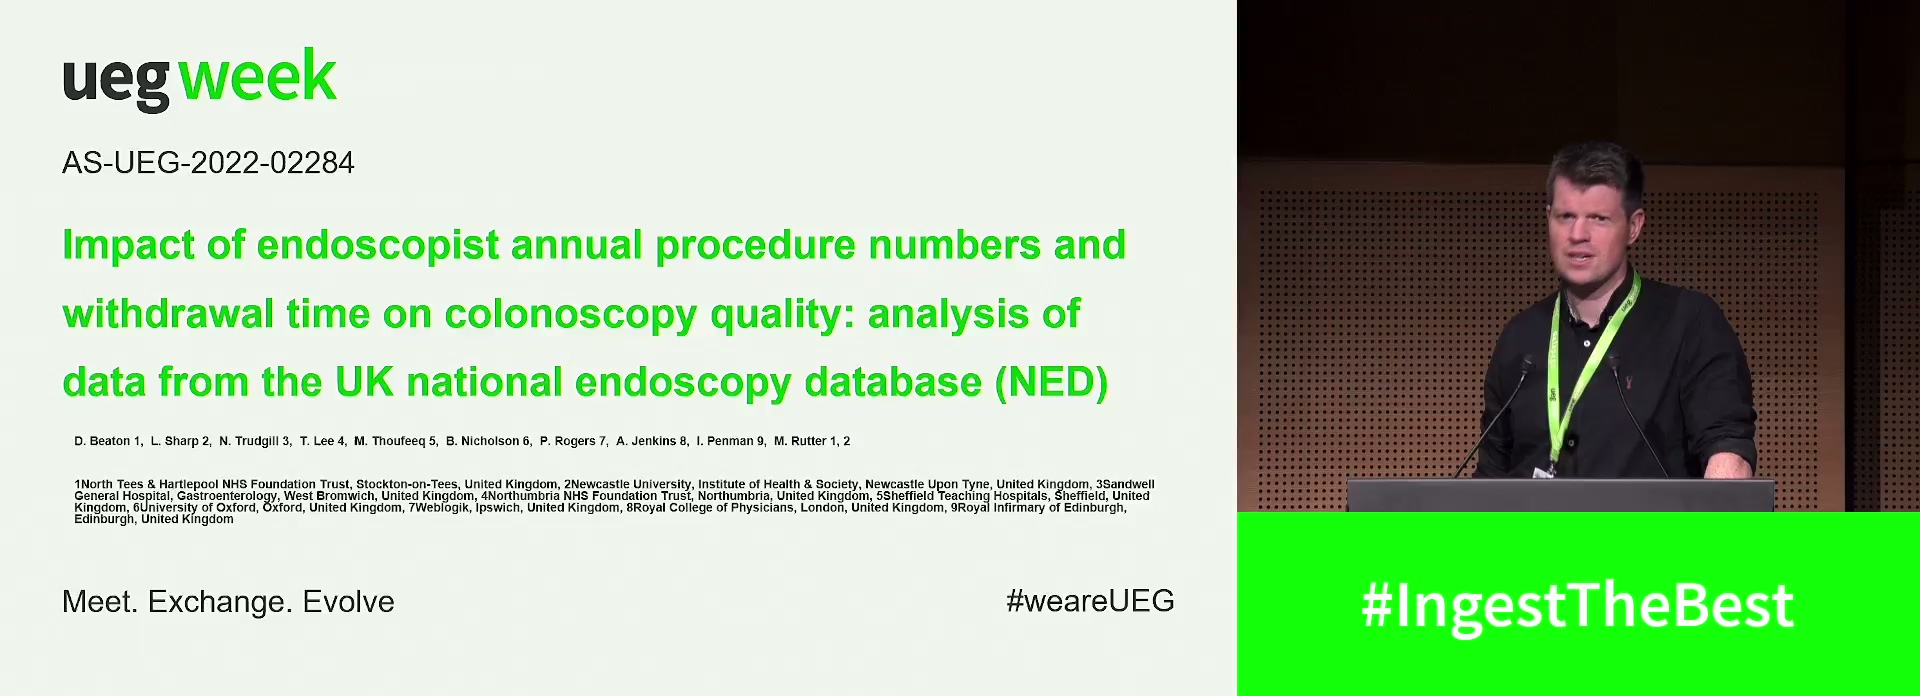 IMPACT OF ENDOSCOPIST ANNUAL PROCEDURE NUMBERS AND WITHDRAWAL TIME ON COLONOSCOPY QUALITY: ANALYSIS OF DATA FROM THE UK NATIONAL ENDOSCOPY DATABASE (NED)